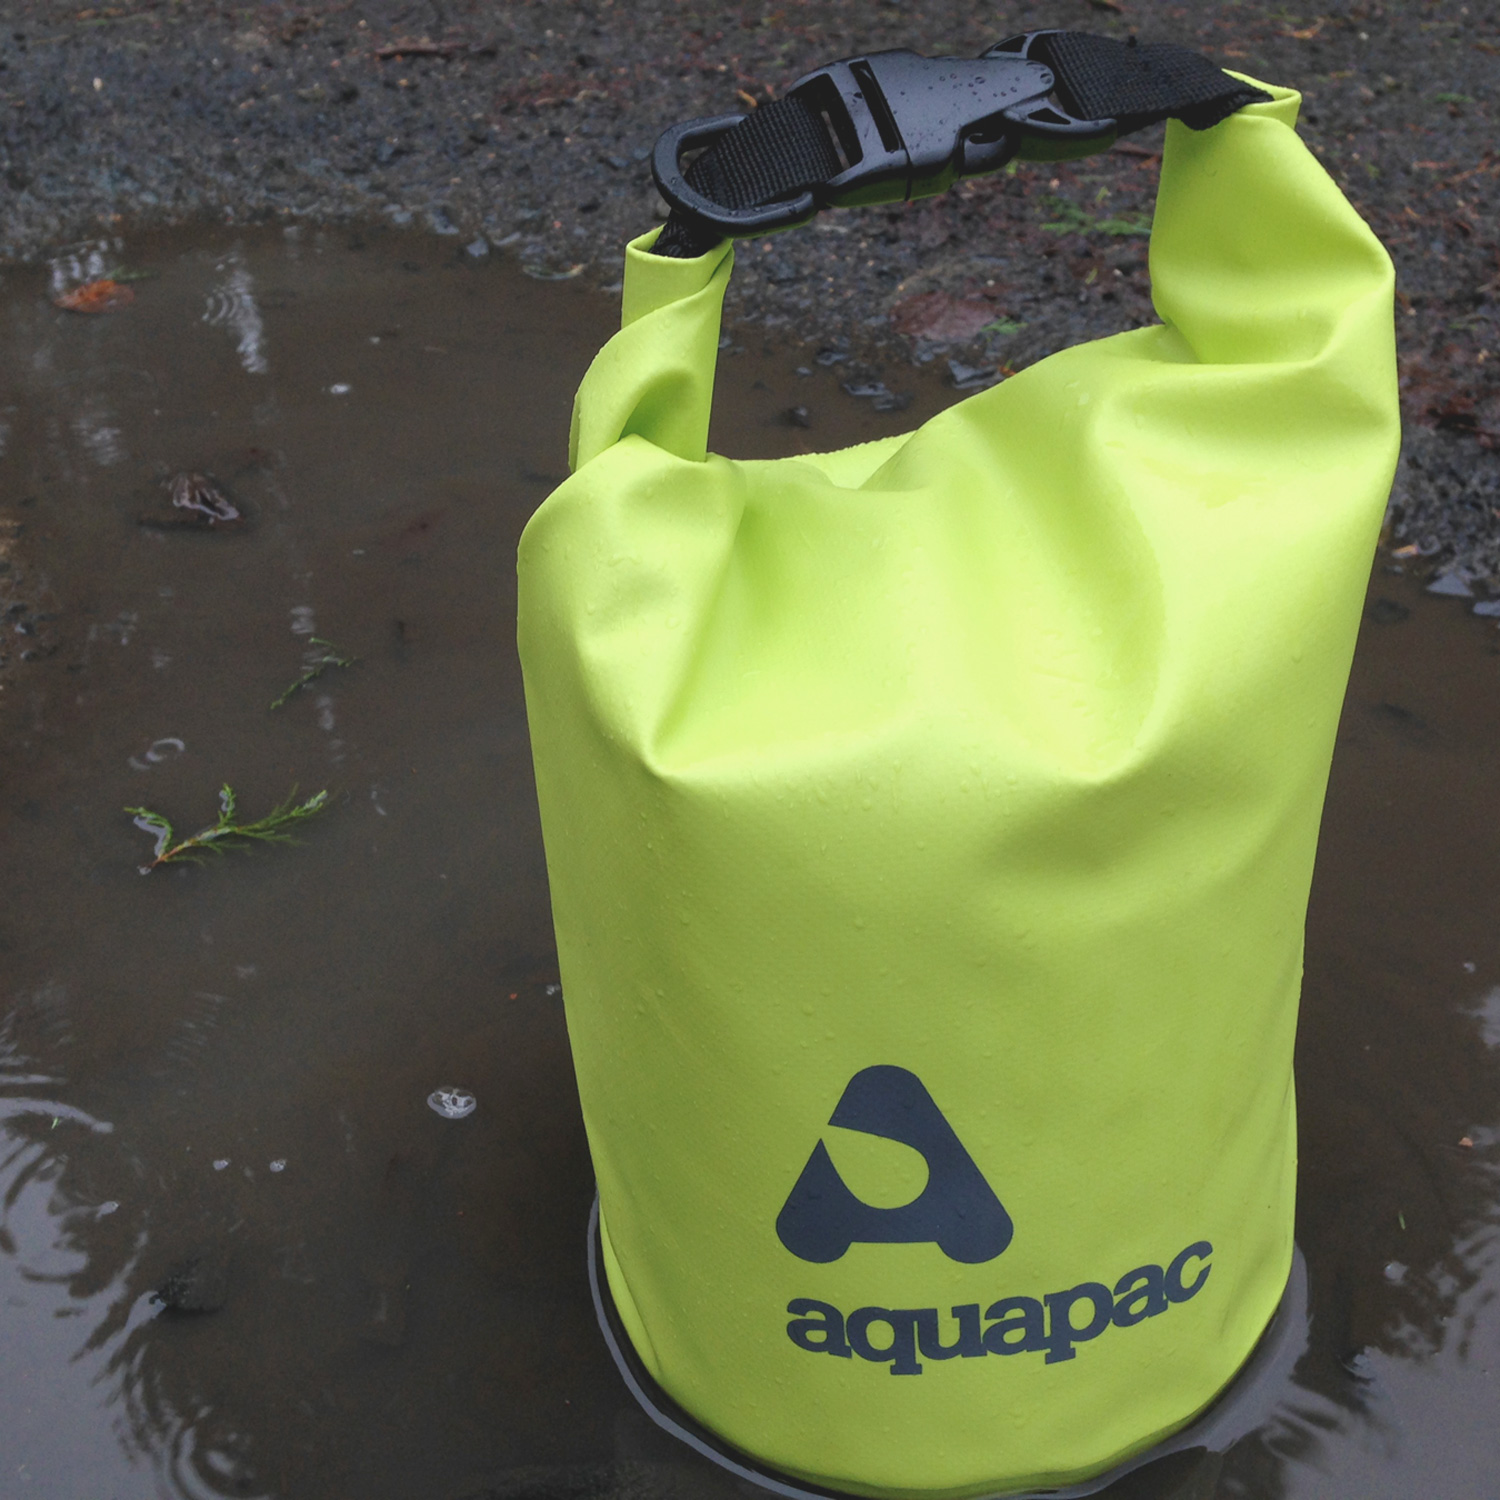 TrailProof™ Drybags & shoulder strap